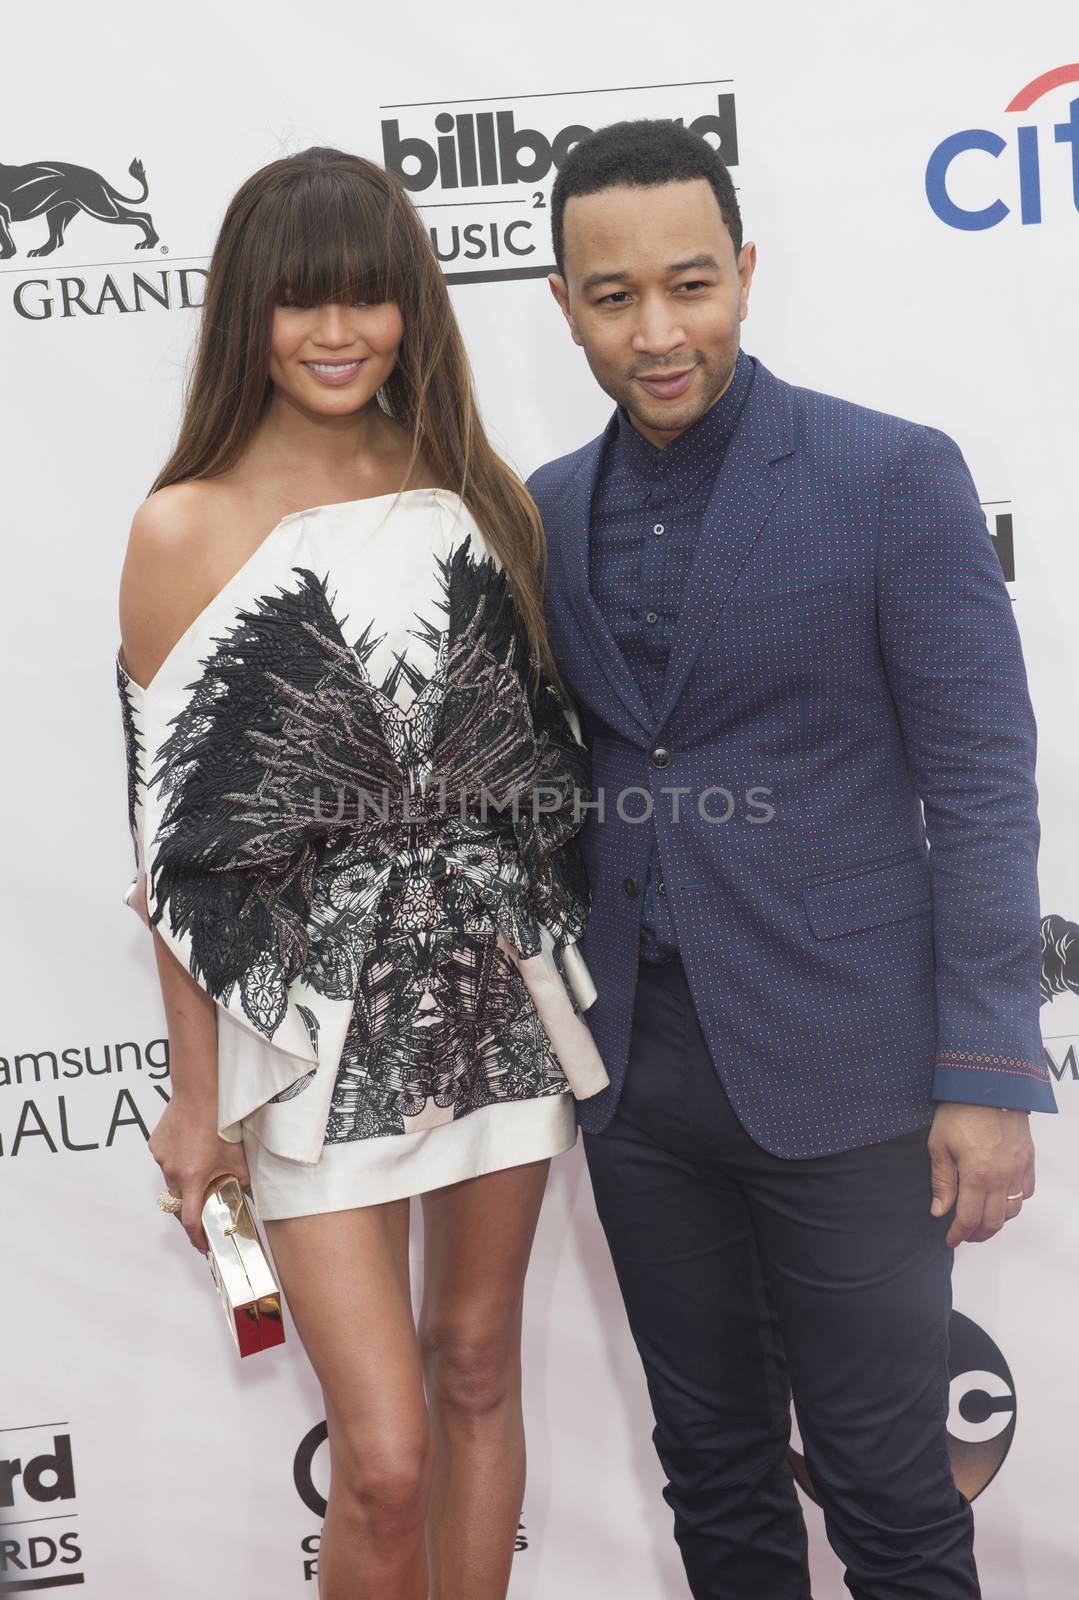 LAS VEGAS - MAY 18 : Singer/songwriter John Legend (R) and wife model Christine Teigen attend the 2014 Billboard Music Awards at the MGM Grand Garden Arena on May 18 , 2014 in Las Vegas.